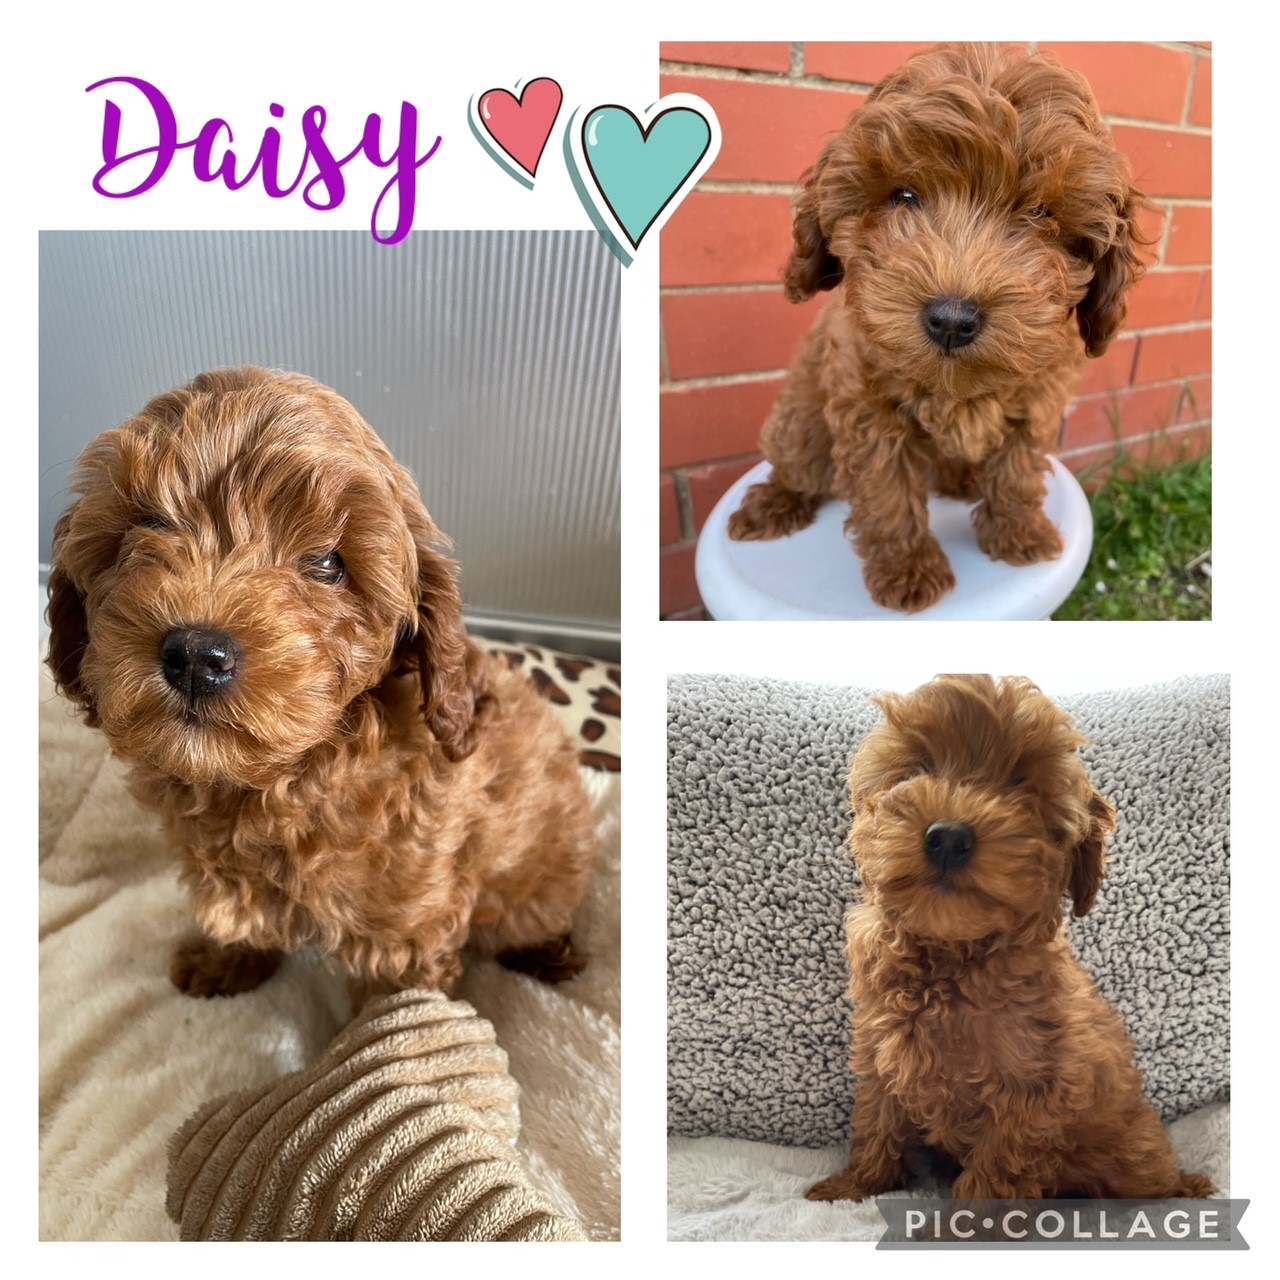 Gorgeous Teddy Toy Cavoodles